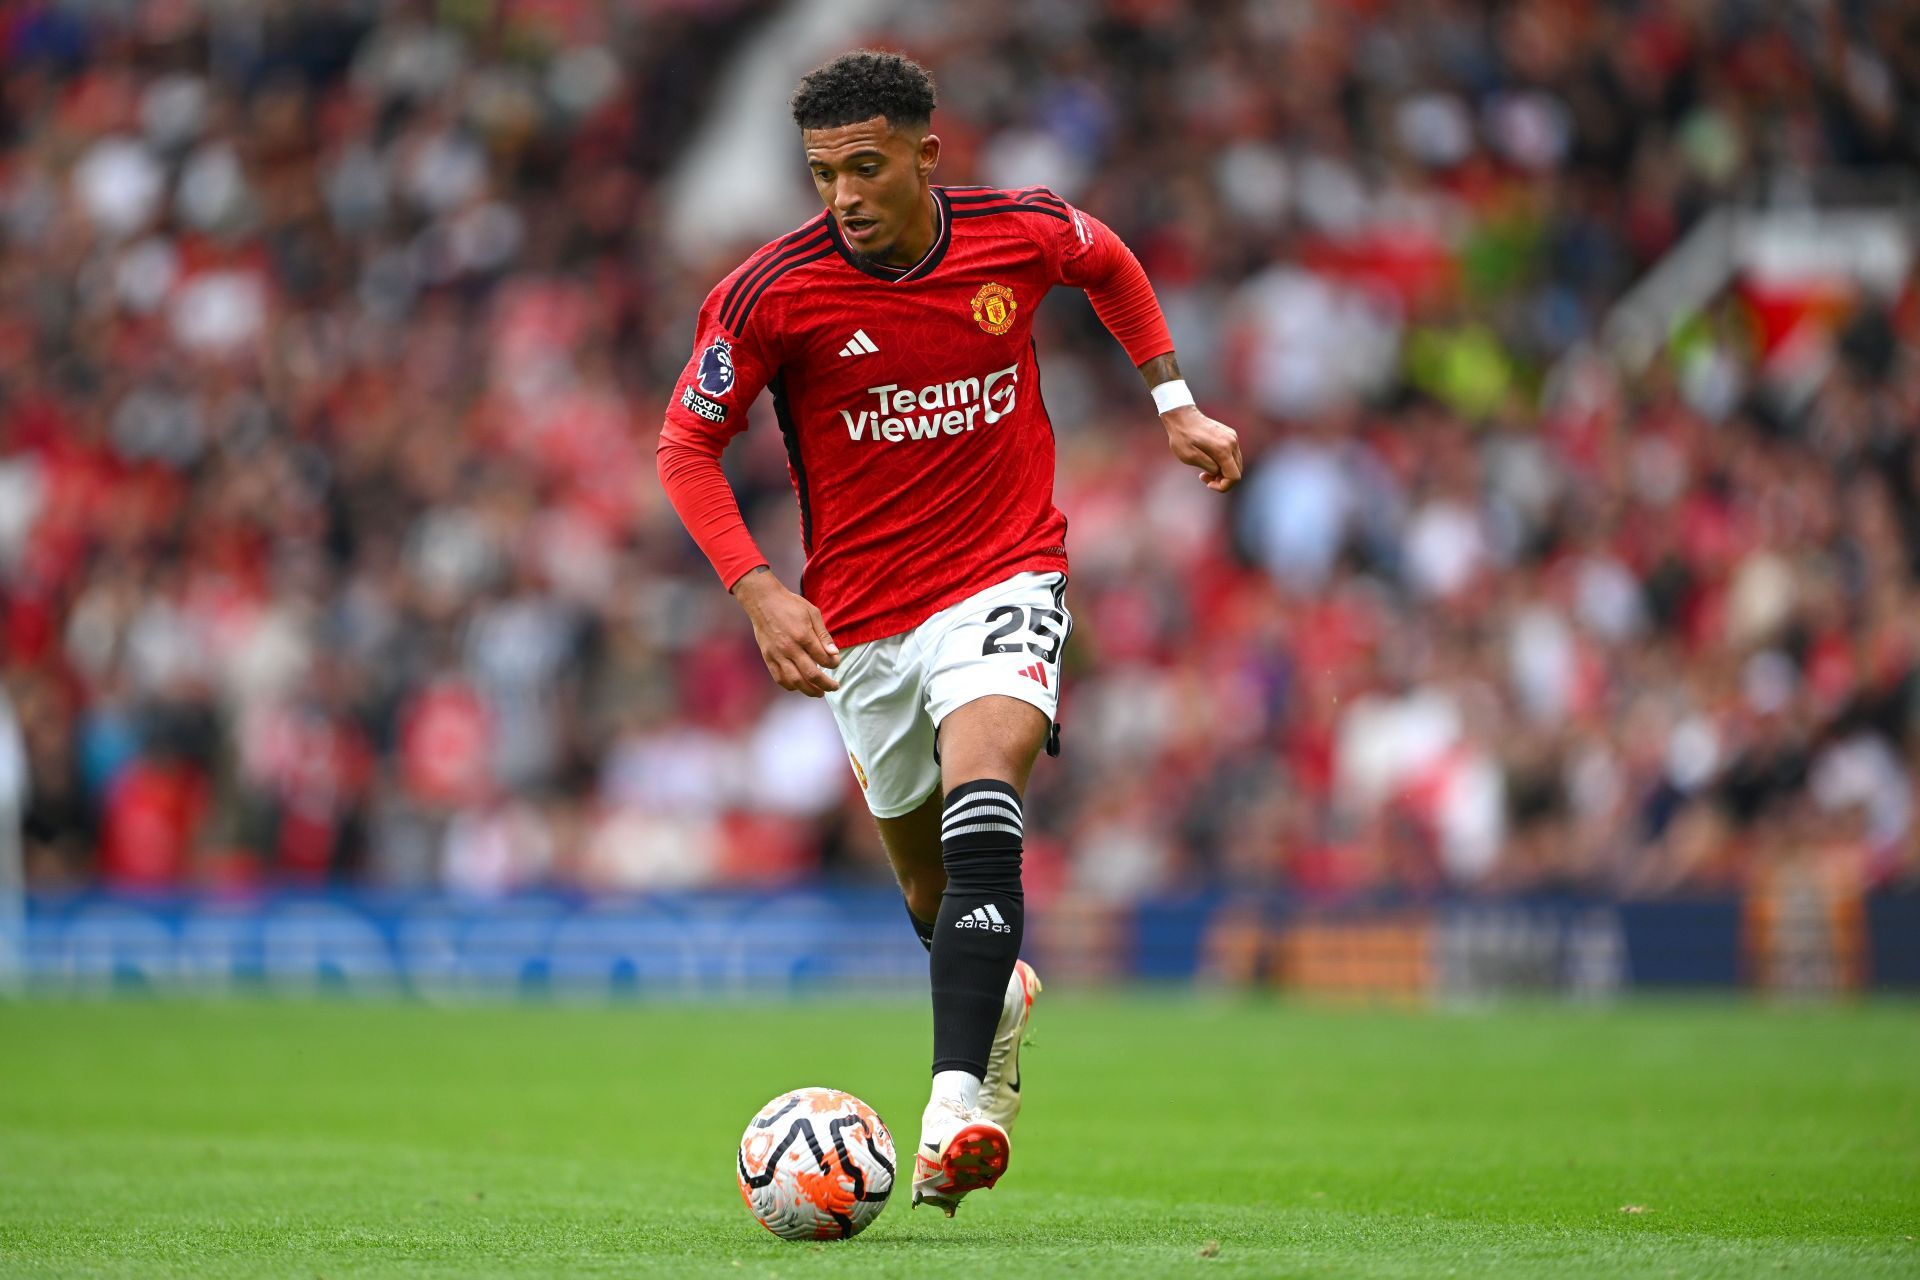 Jadon Sancho&rsquo;s time at Old Trafford could be coming to an end